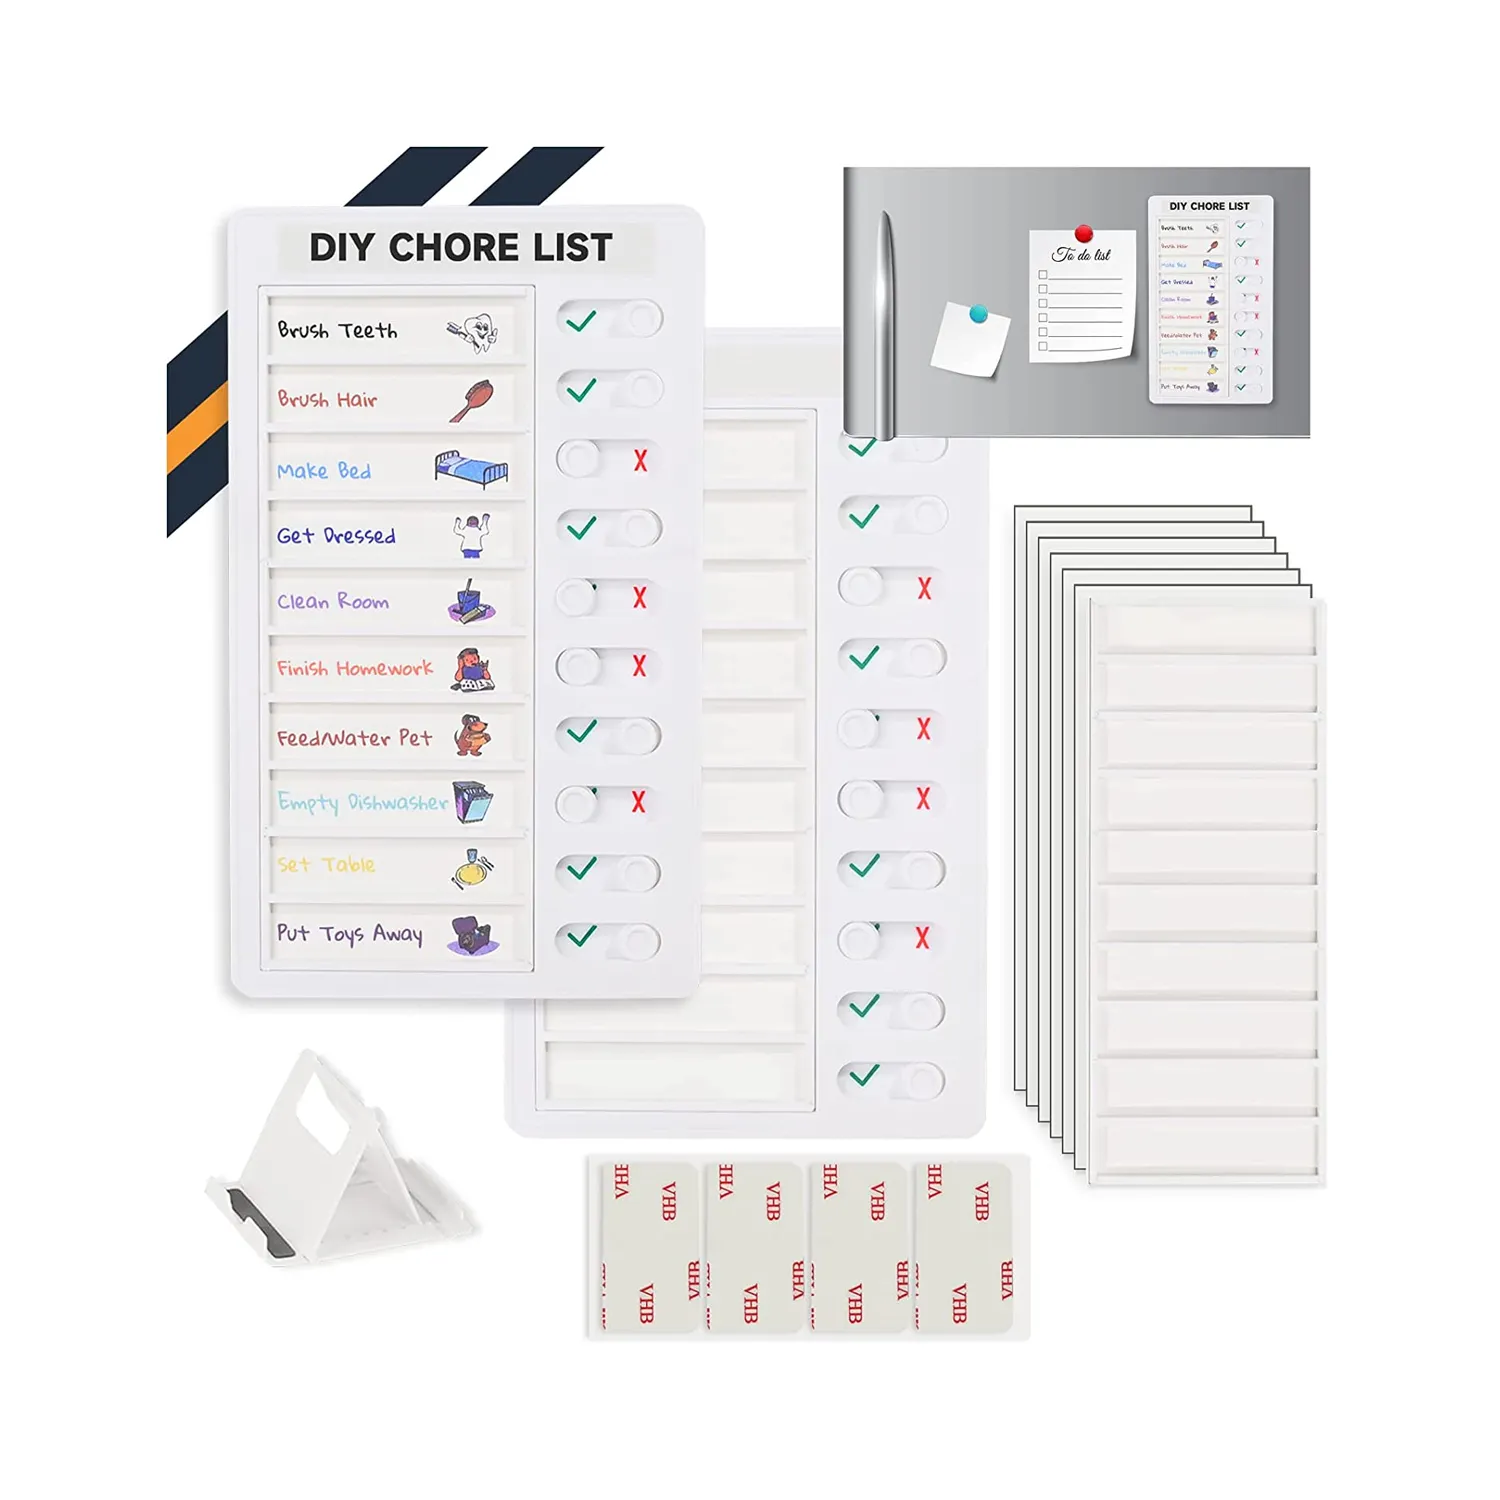 My Chores Checklist Task Board Suitable For Daily Household Chores RV Check List Removable With Slider